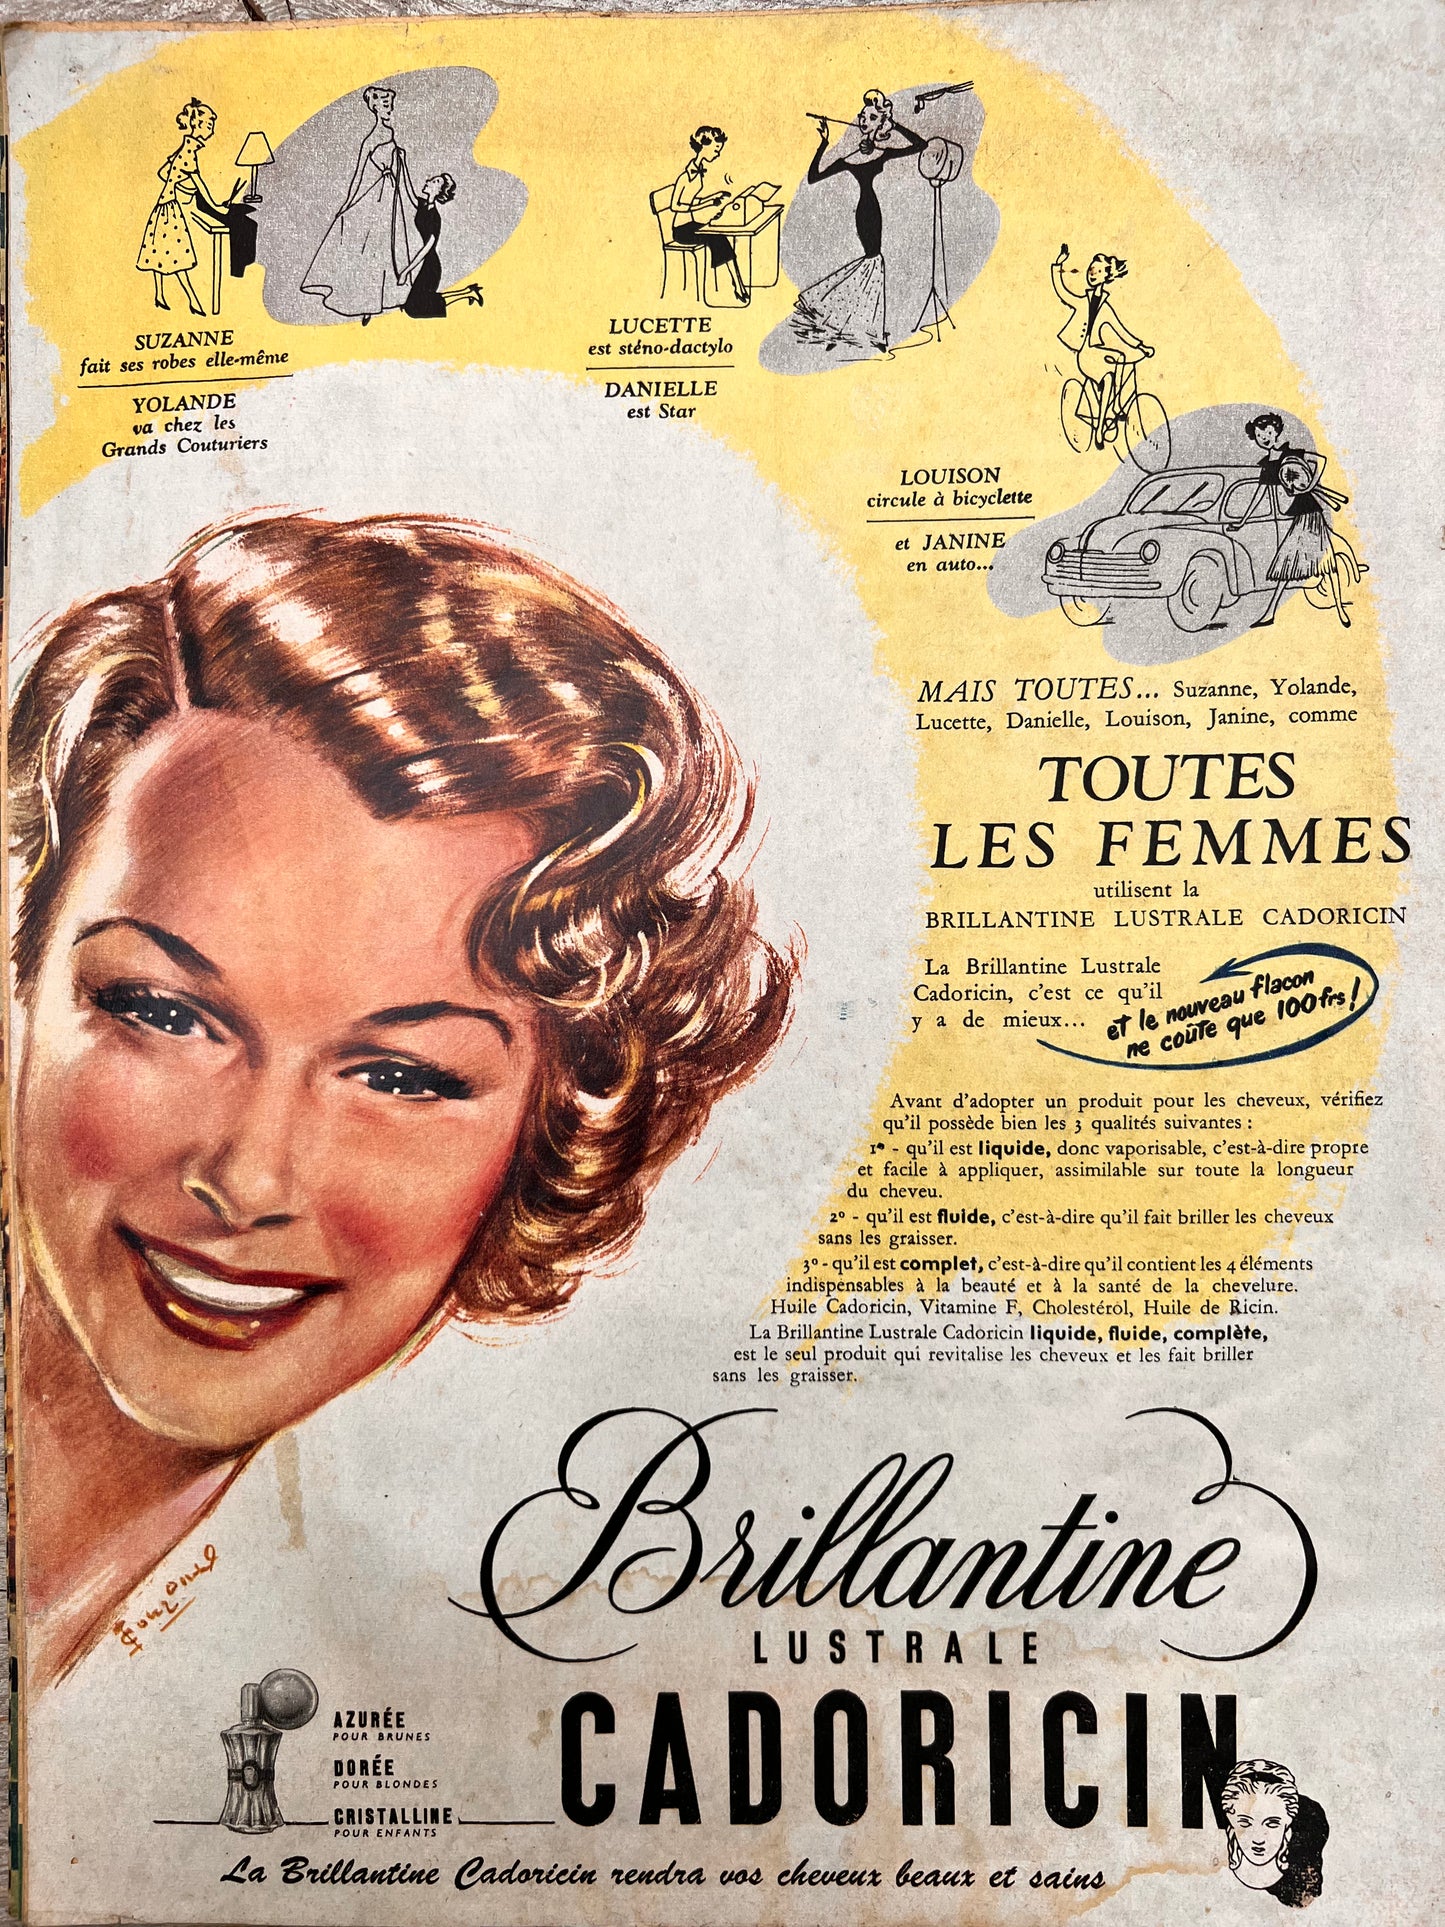 October 1951 French Women's Paper Marie France